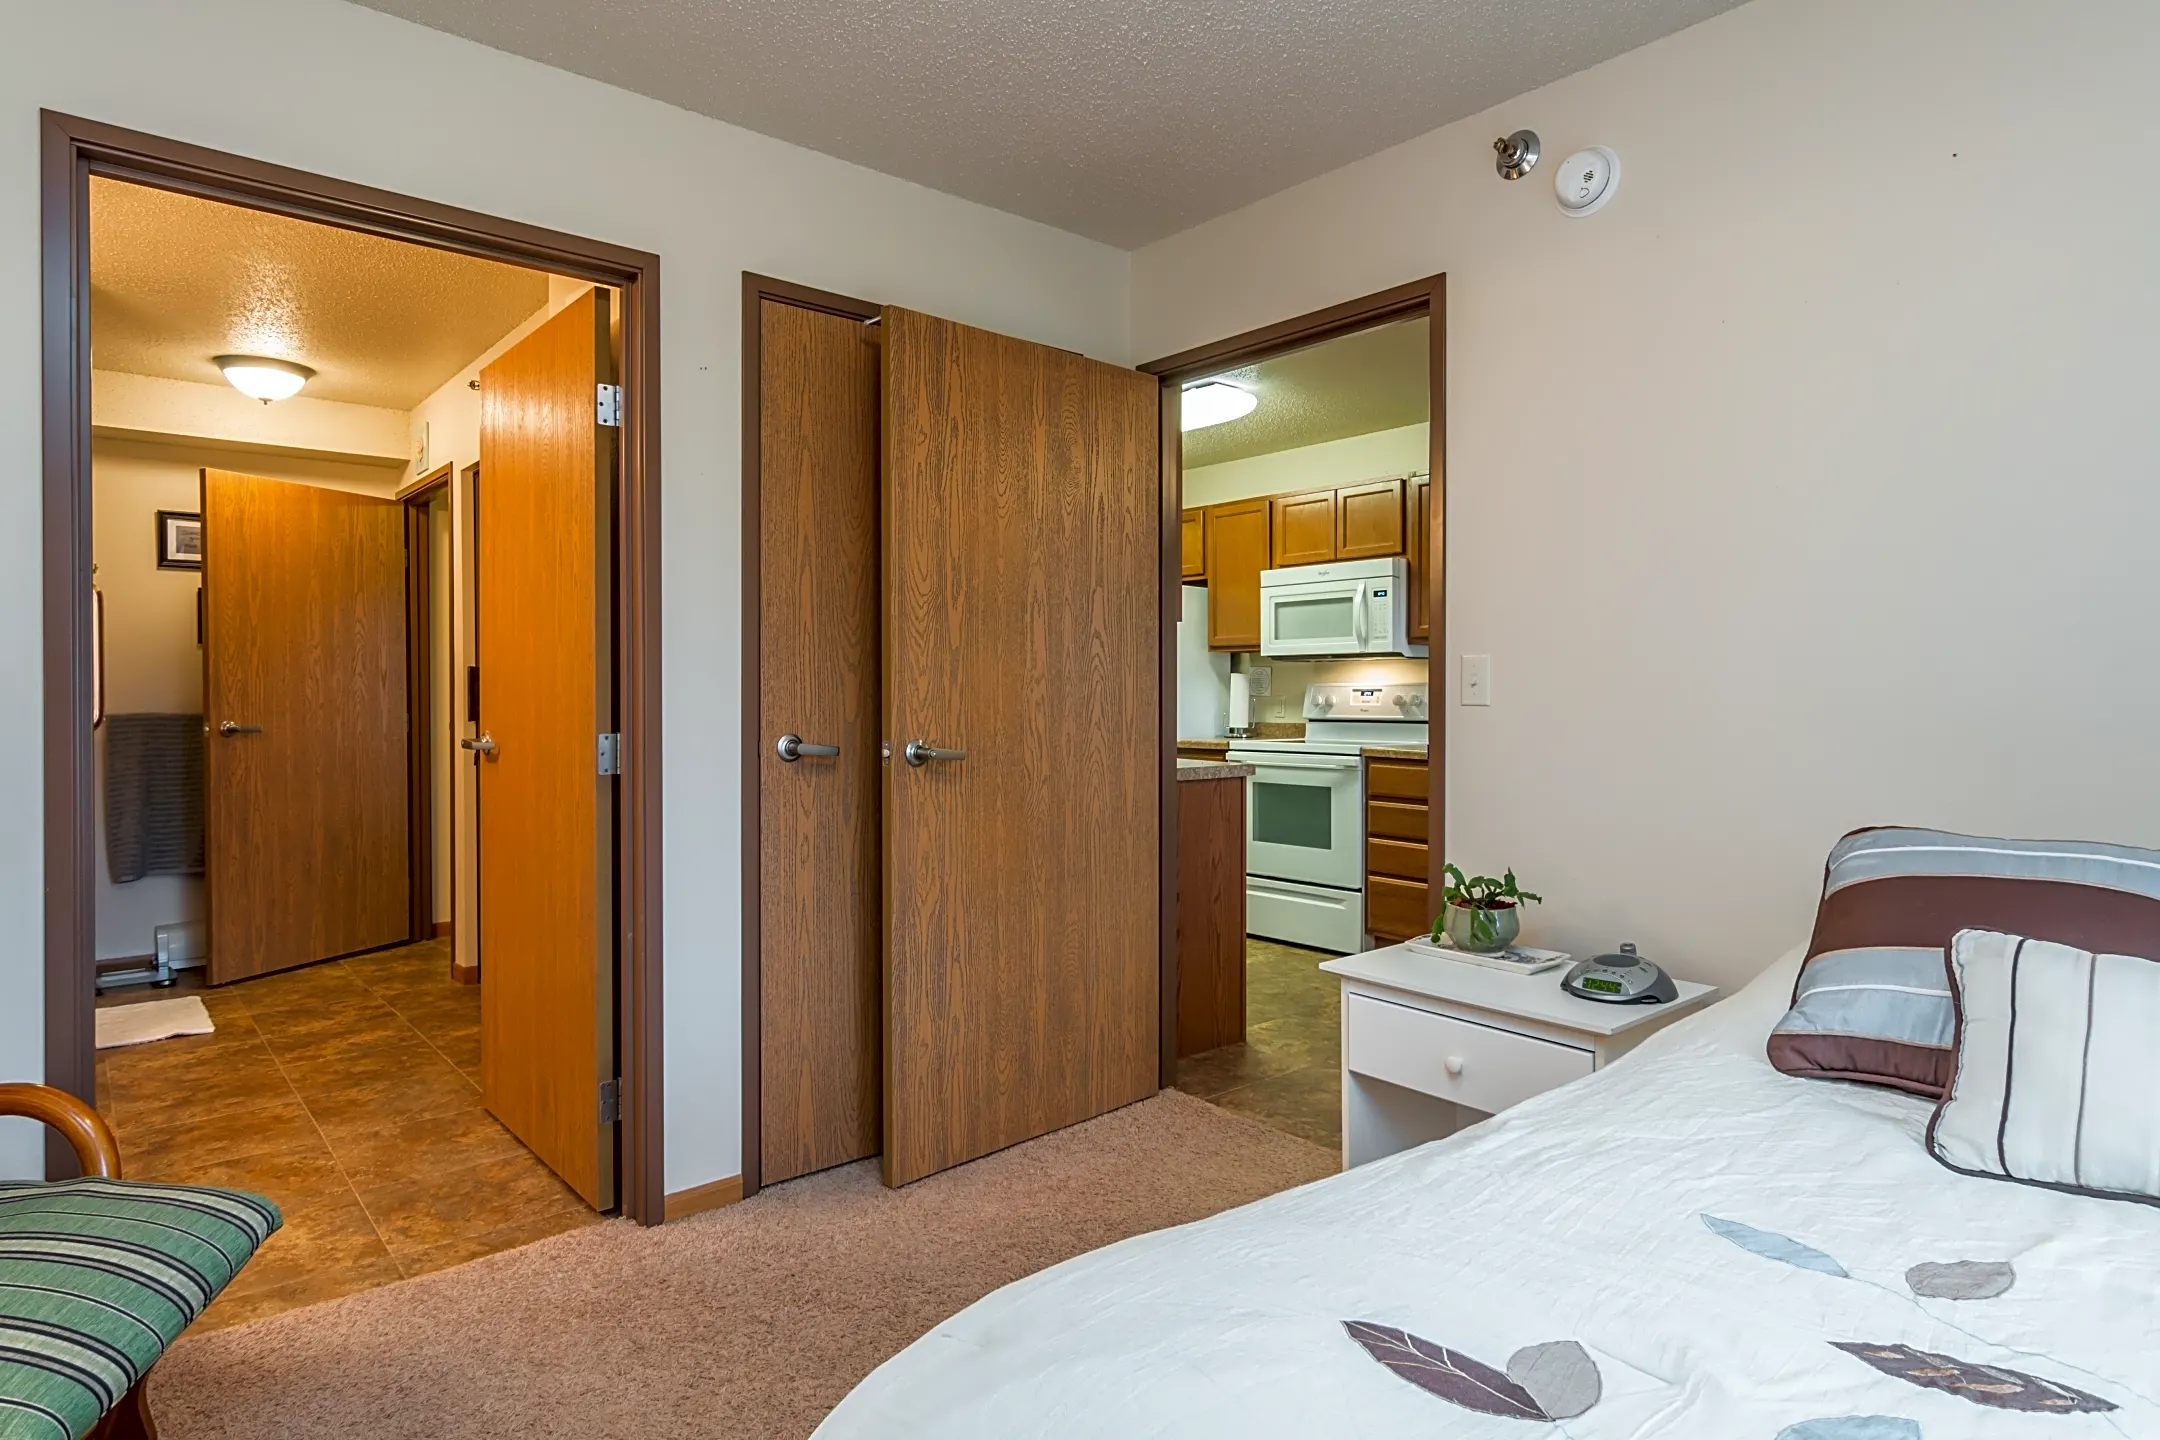 Bedroom - Dakota Commons Townhomes and Apartments - West Fargo, ND